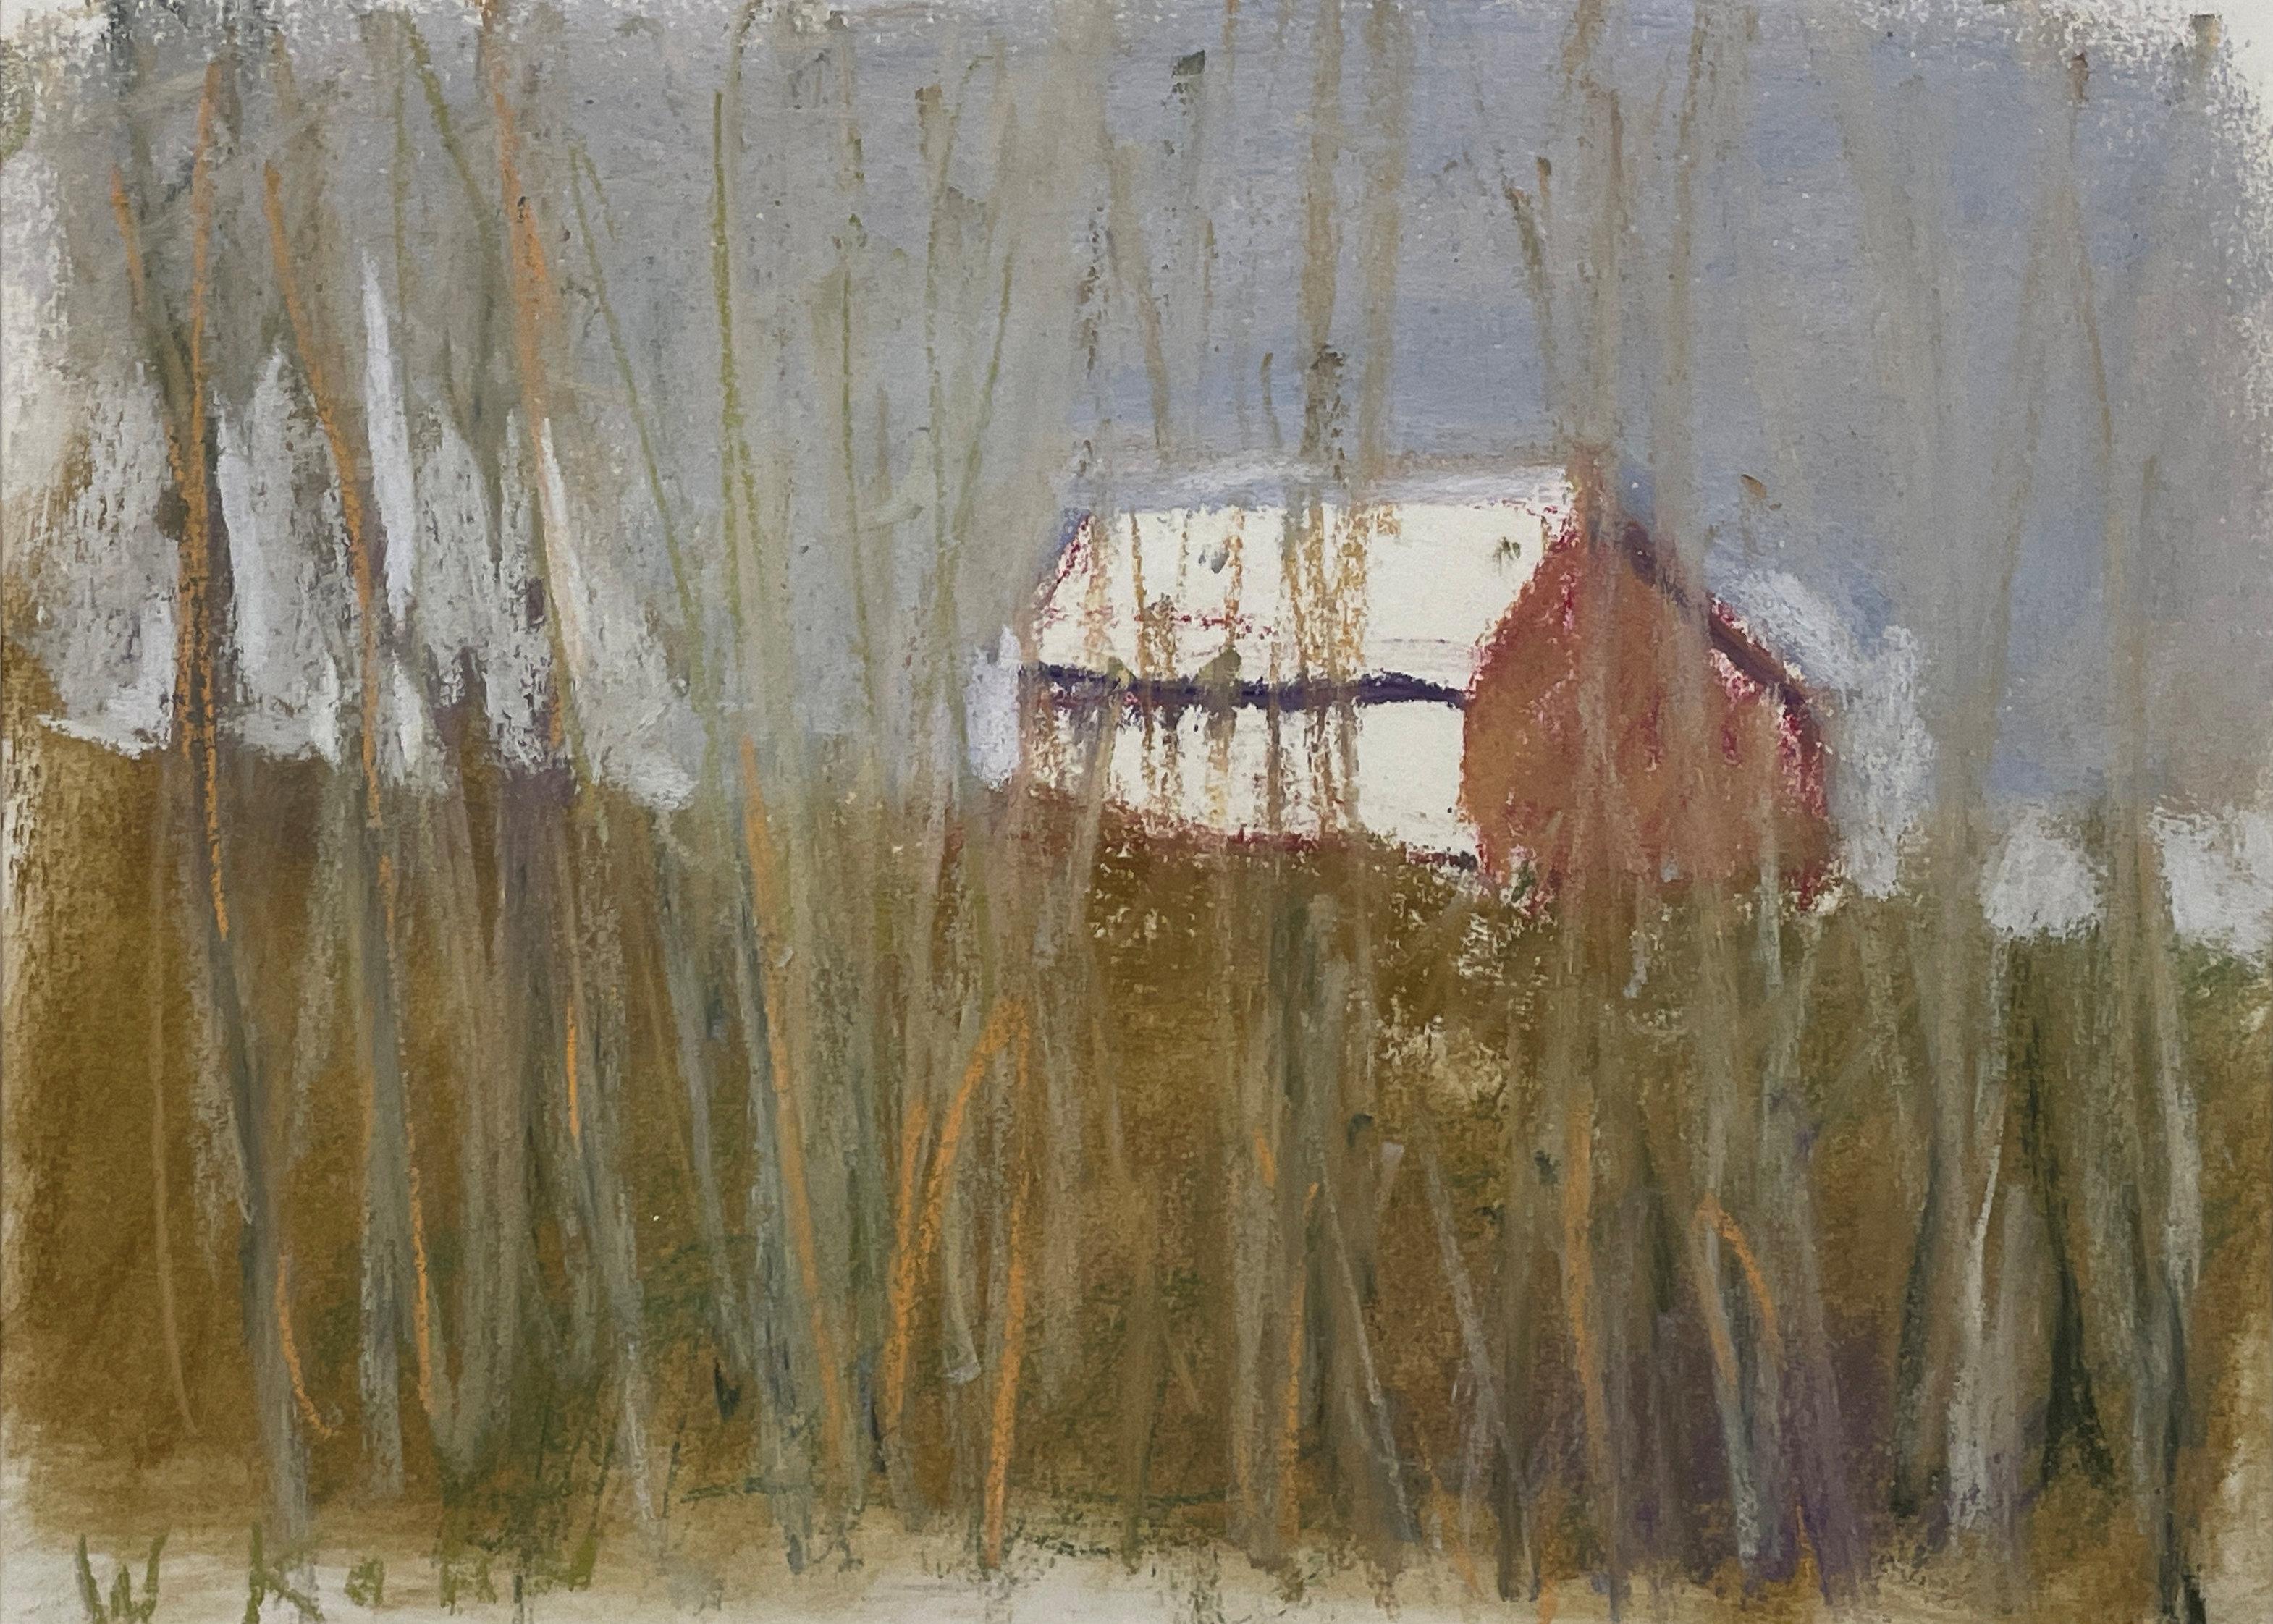 Wolf Kahn
Behind Reeds, 2004
Signed lower left
Pastel on paper
7 x 9 inches

Provenance:
The artist
Ameringer McEnery Yohe Gallery, New York
Private Collection, Florida

An important member of the second generation New York School, Wolf Kahn is